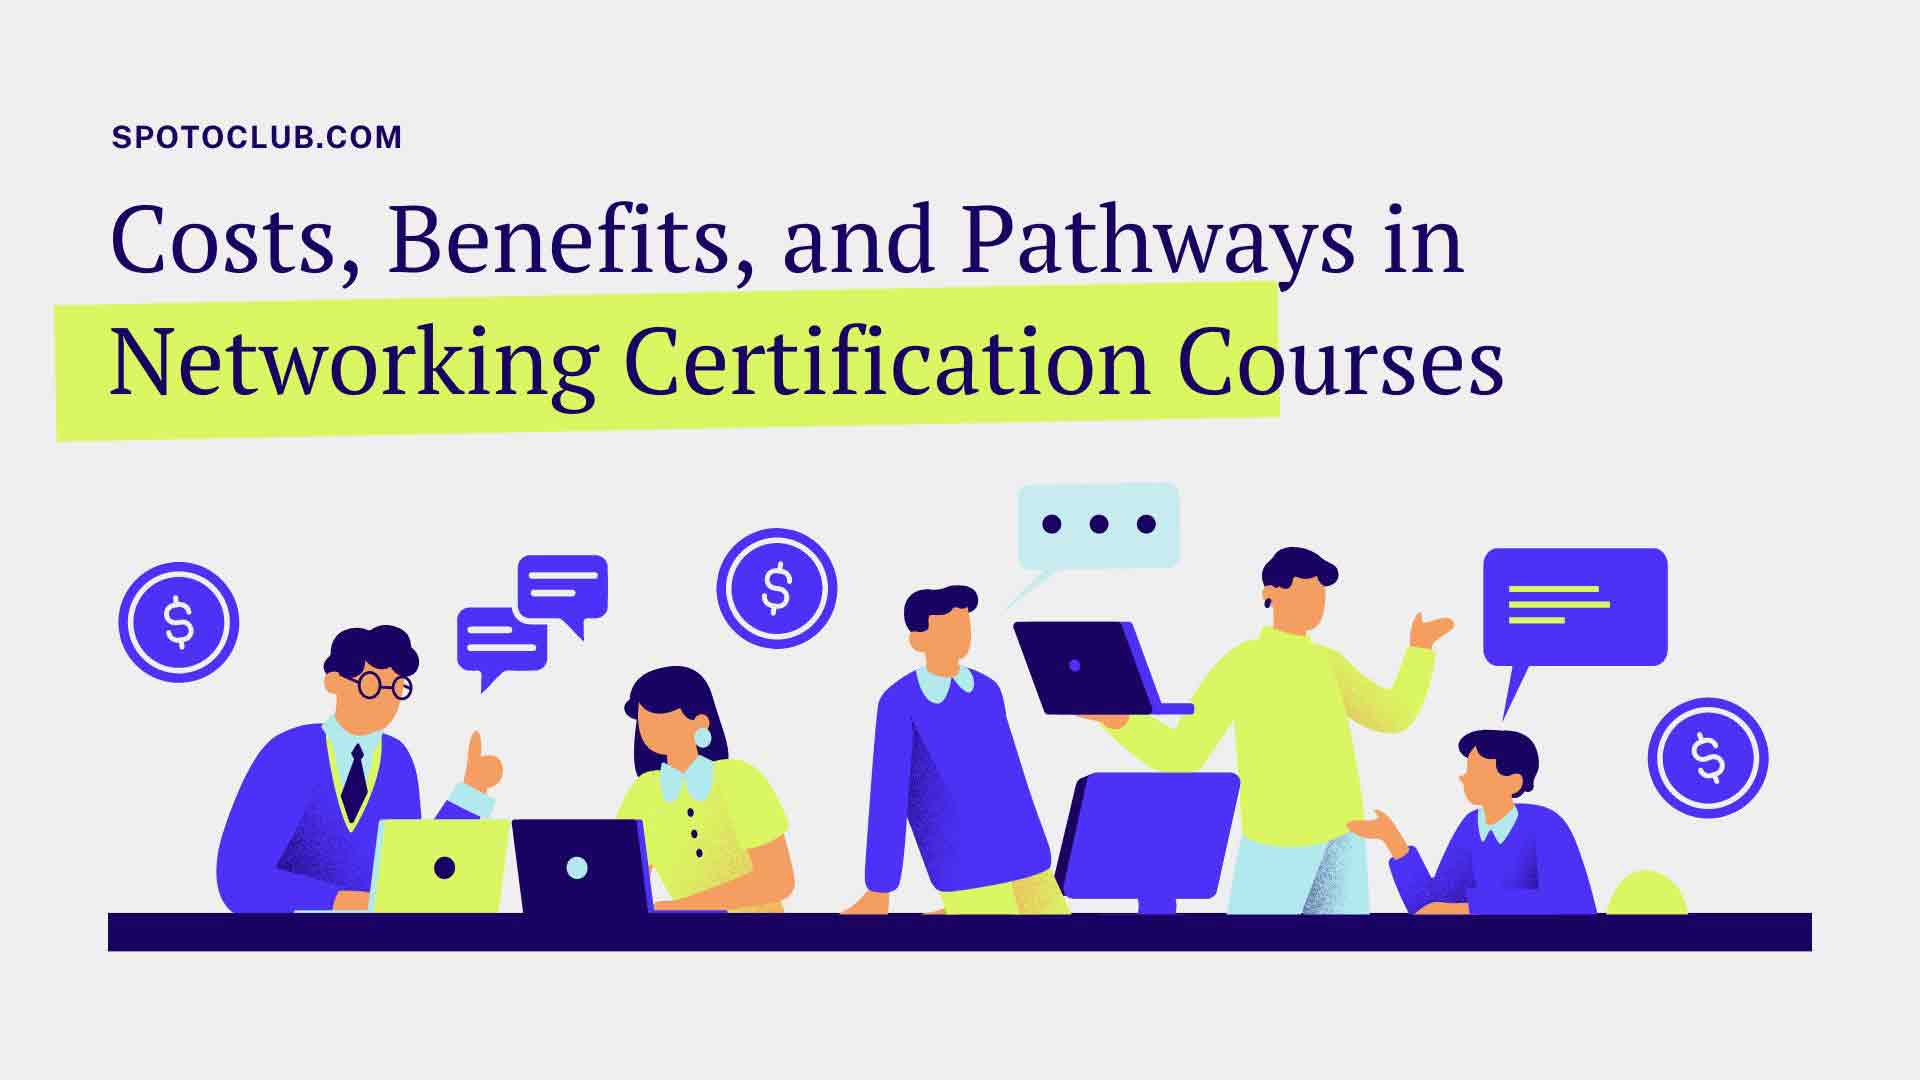 Costs, Benefits, and Pathways in Networking Certification Courses